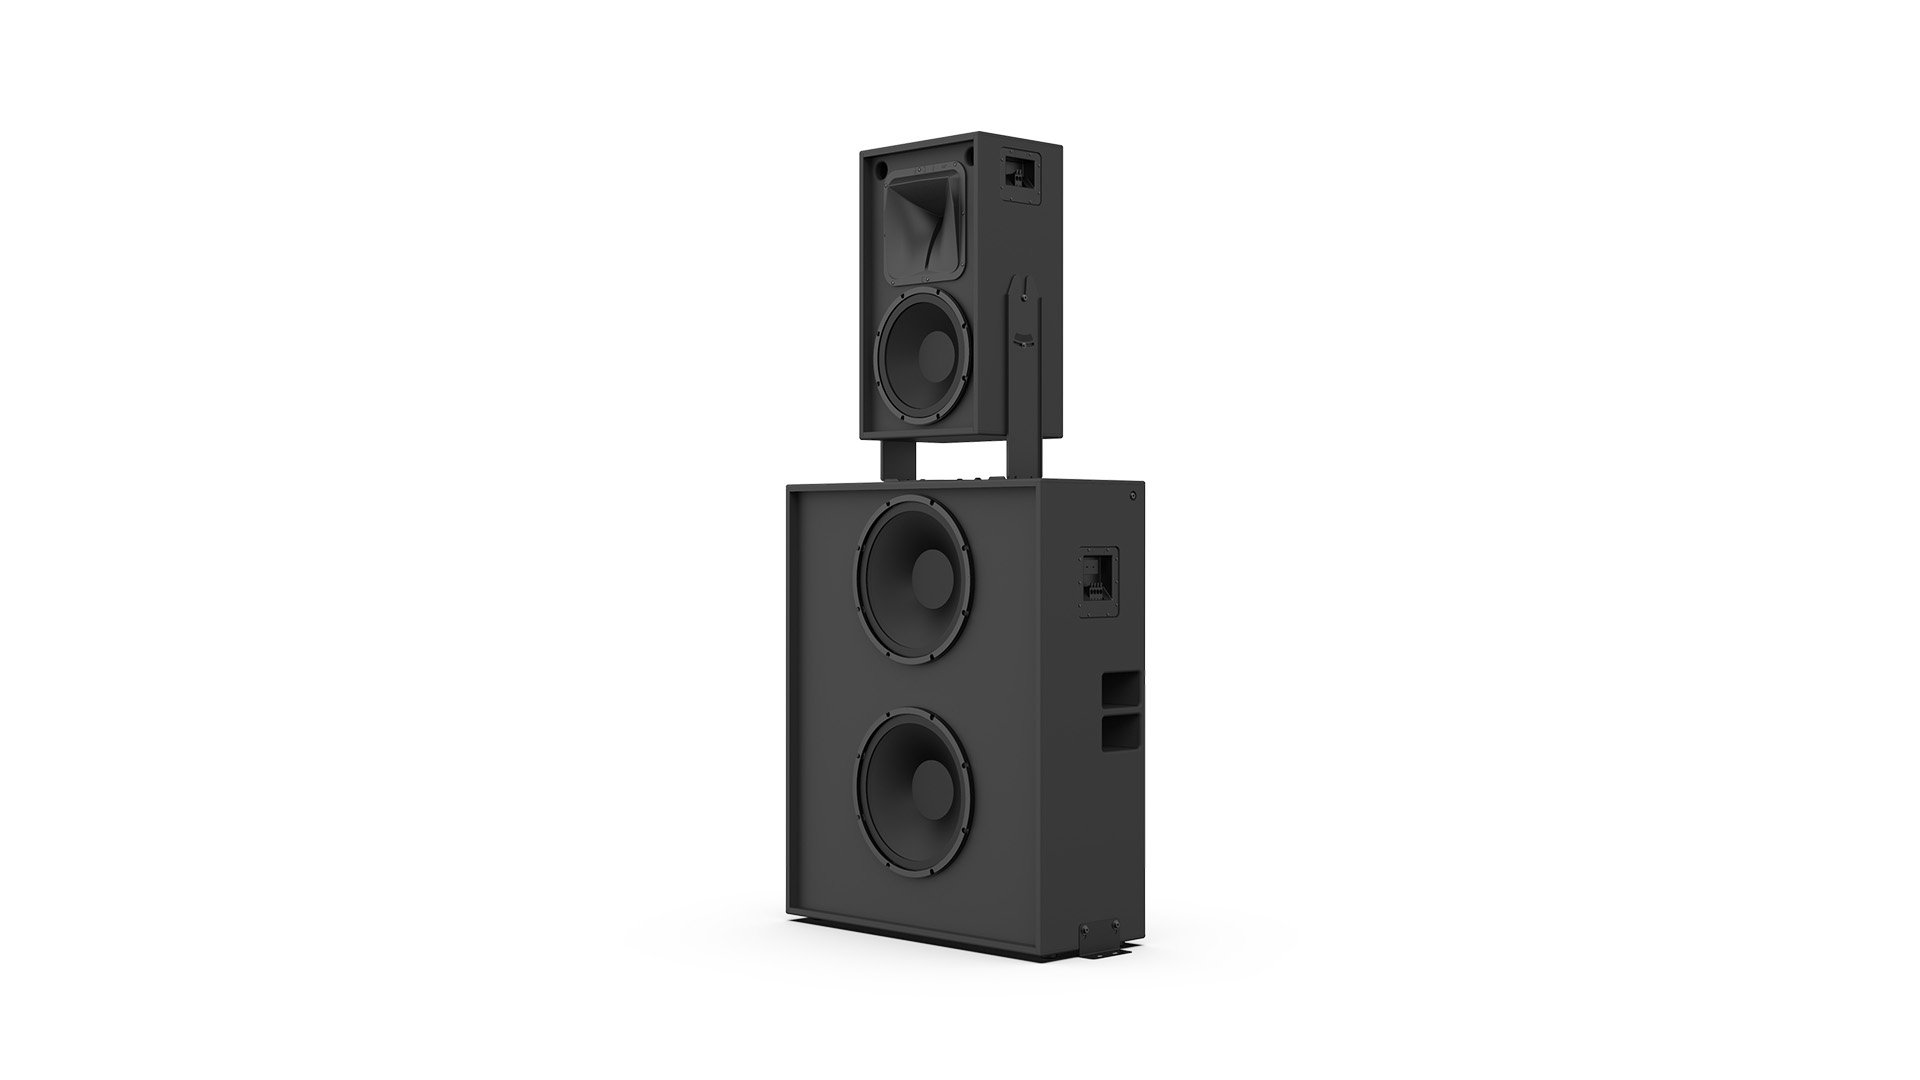 JBL® Cinema Series Home Theater Sound Systems Deliver Big Screen